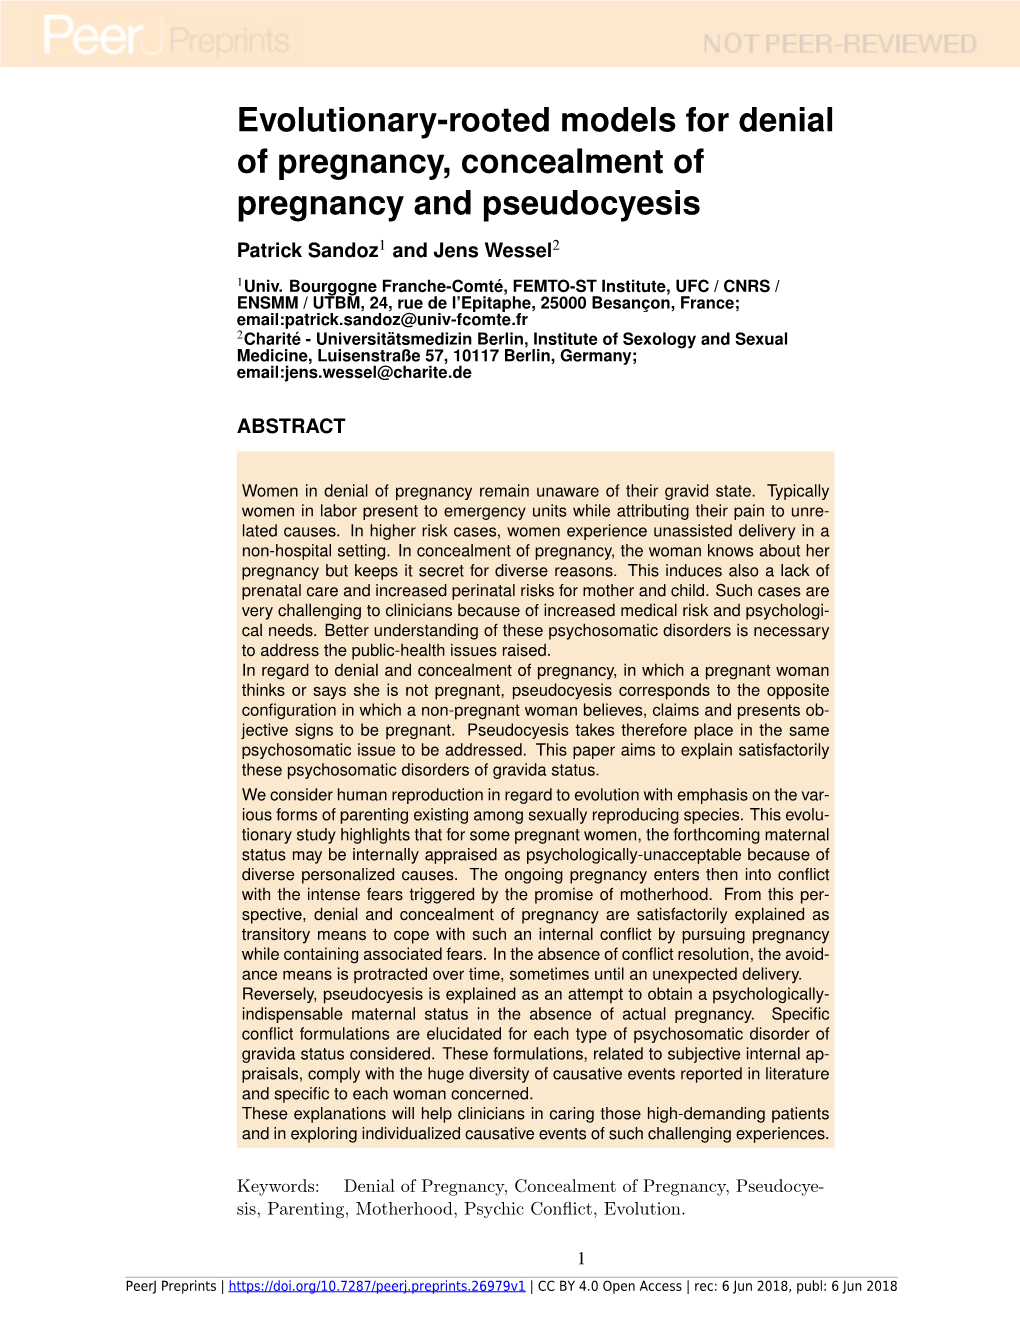 Evolutionary-Rooted Models for Denial of Pregnancy, Concealment of Pregnancy and Pseudocyesis